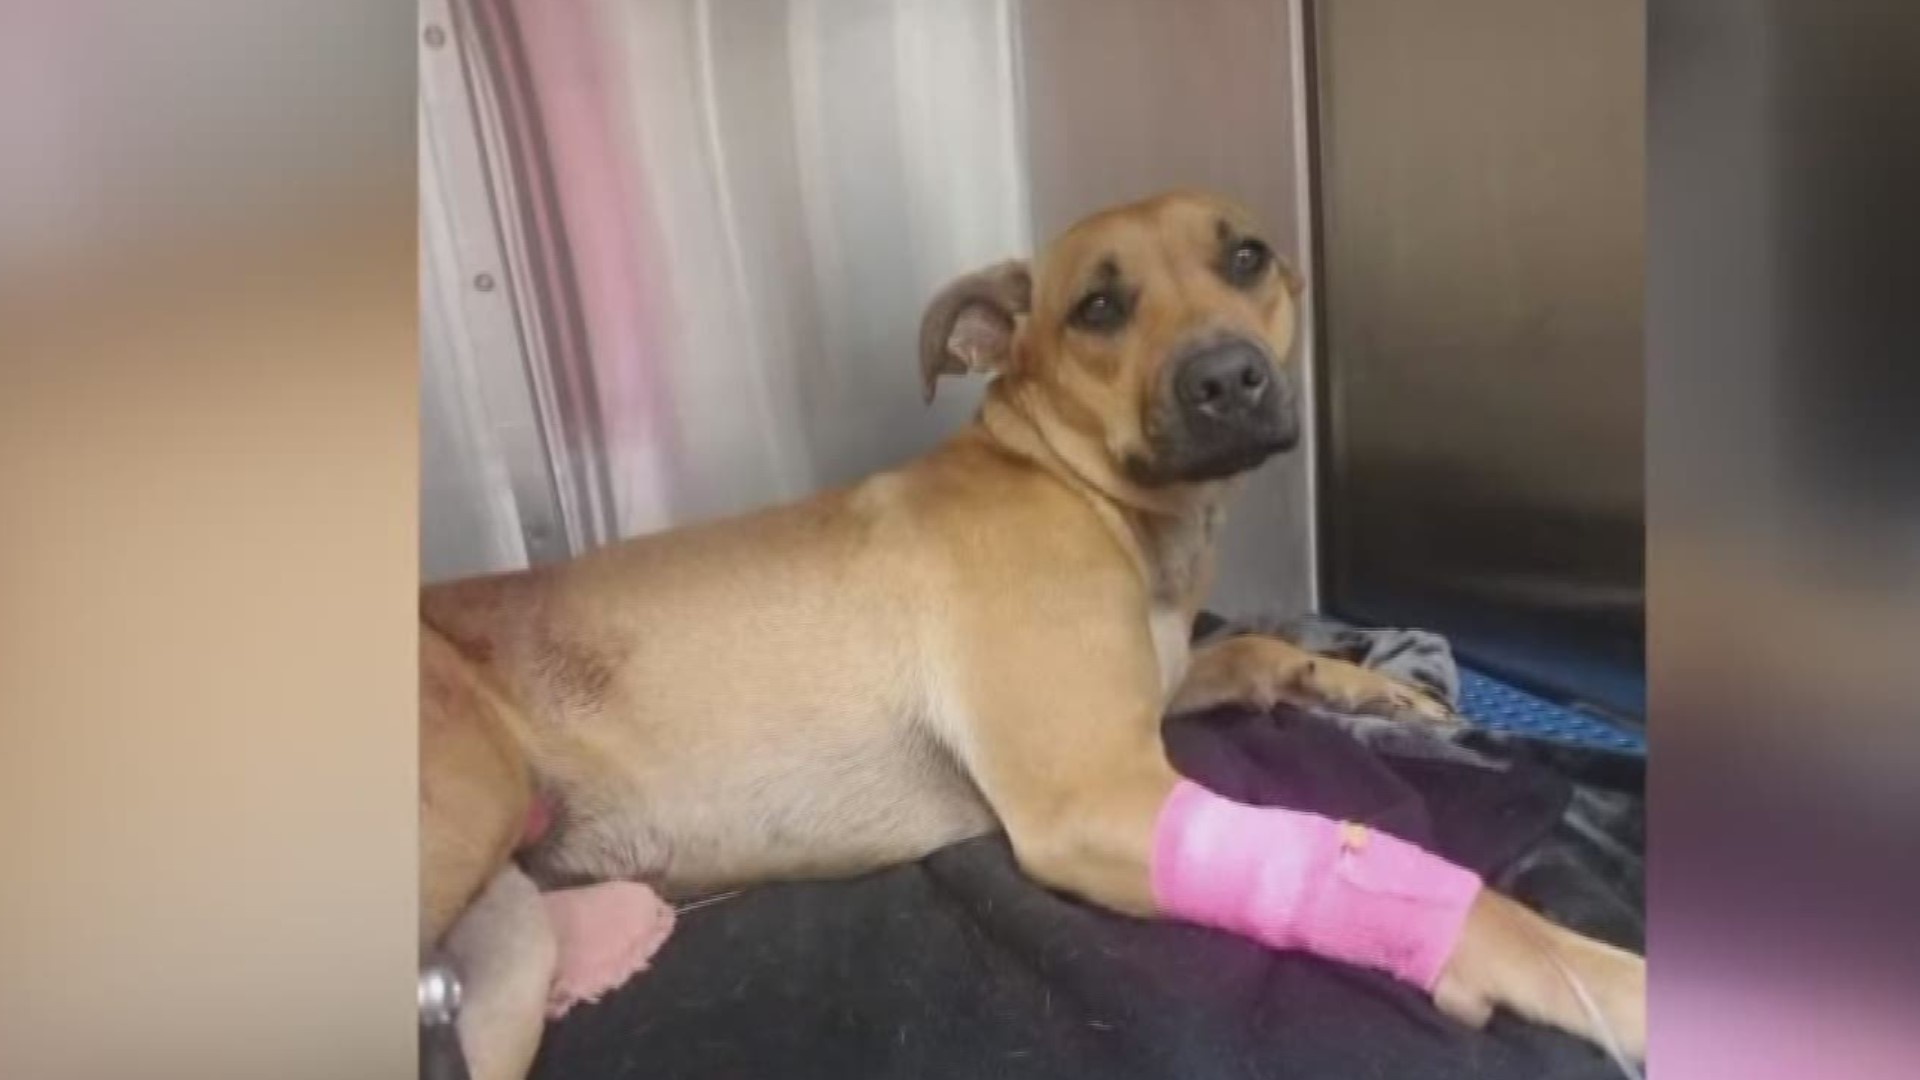 The dog broke its leg and lost extensive blood. Ultimately, ended up dying after surgery.